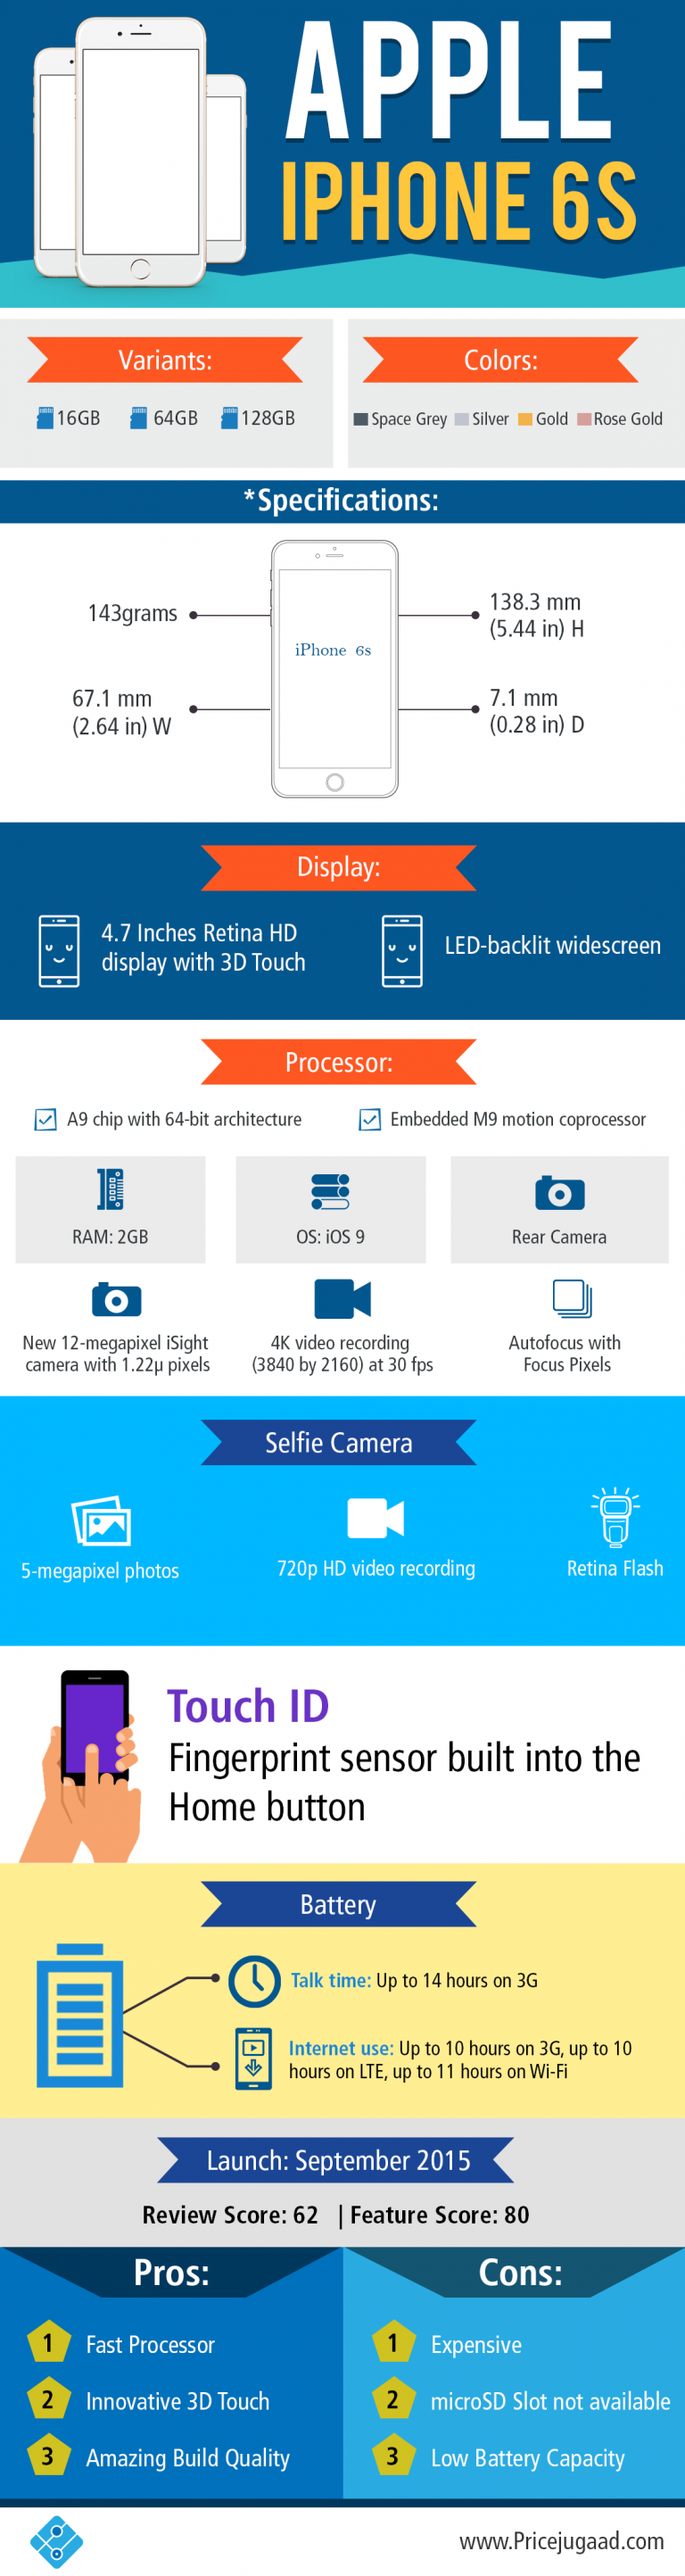 Apple iPhones 6 Review and Specifications [Infographic]